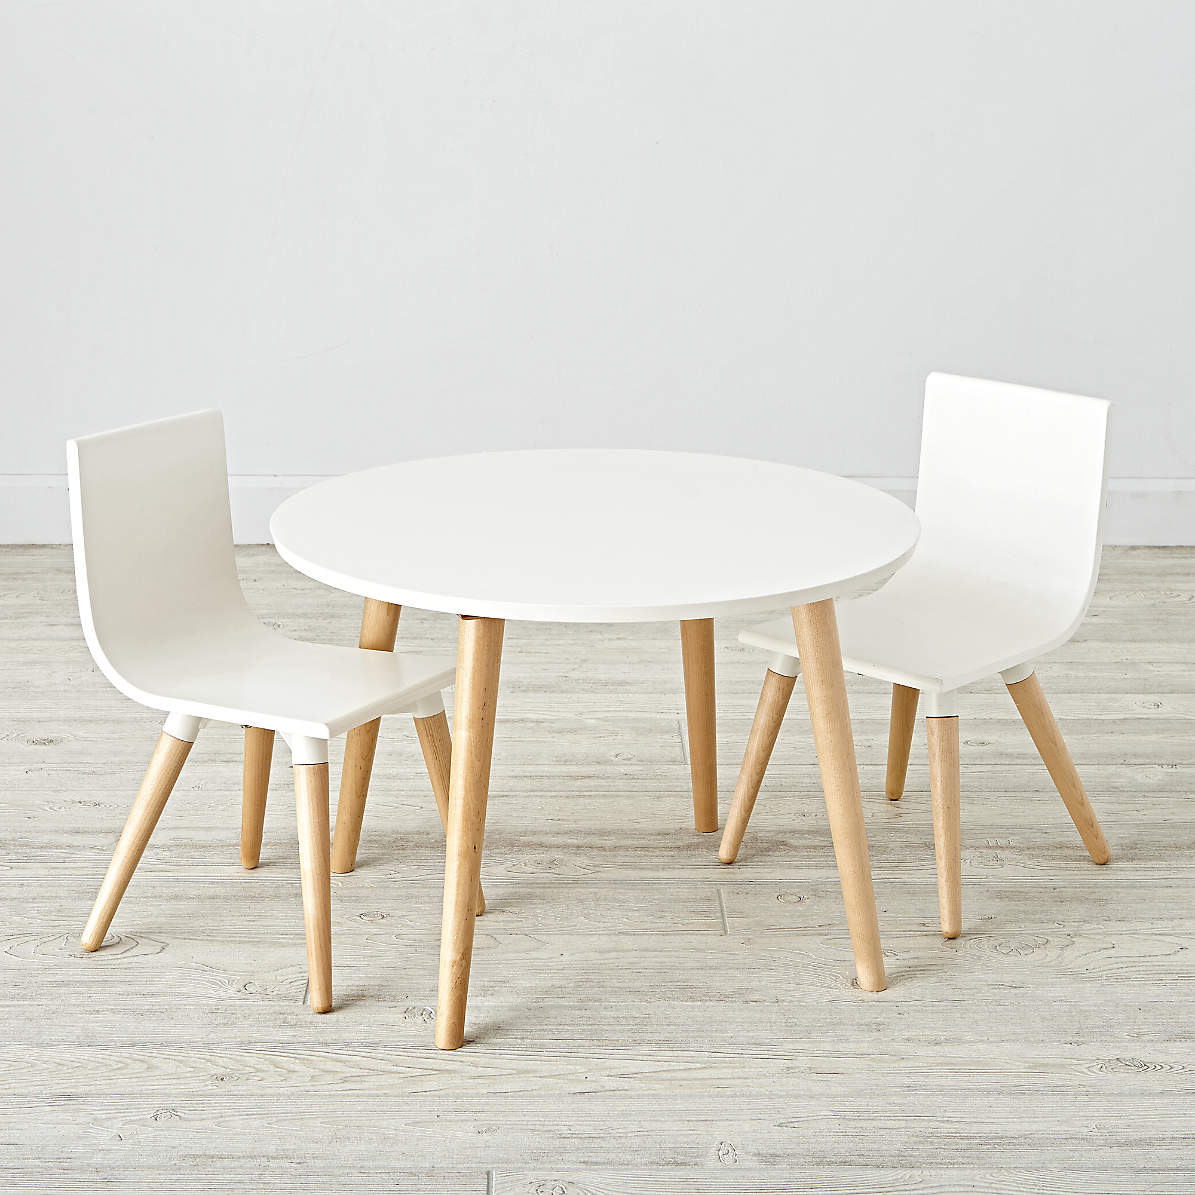 crate and barrel kids play table